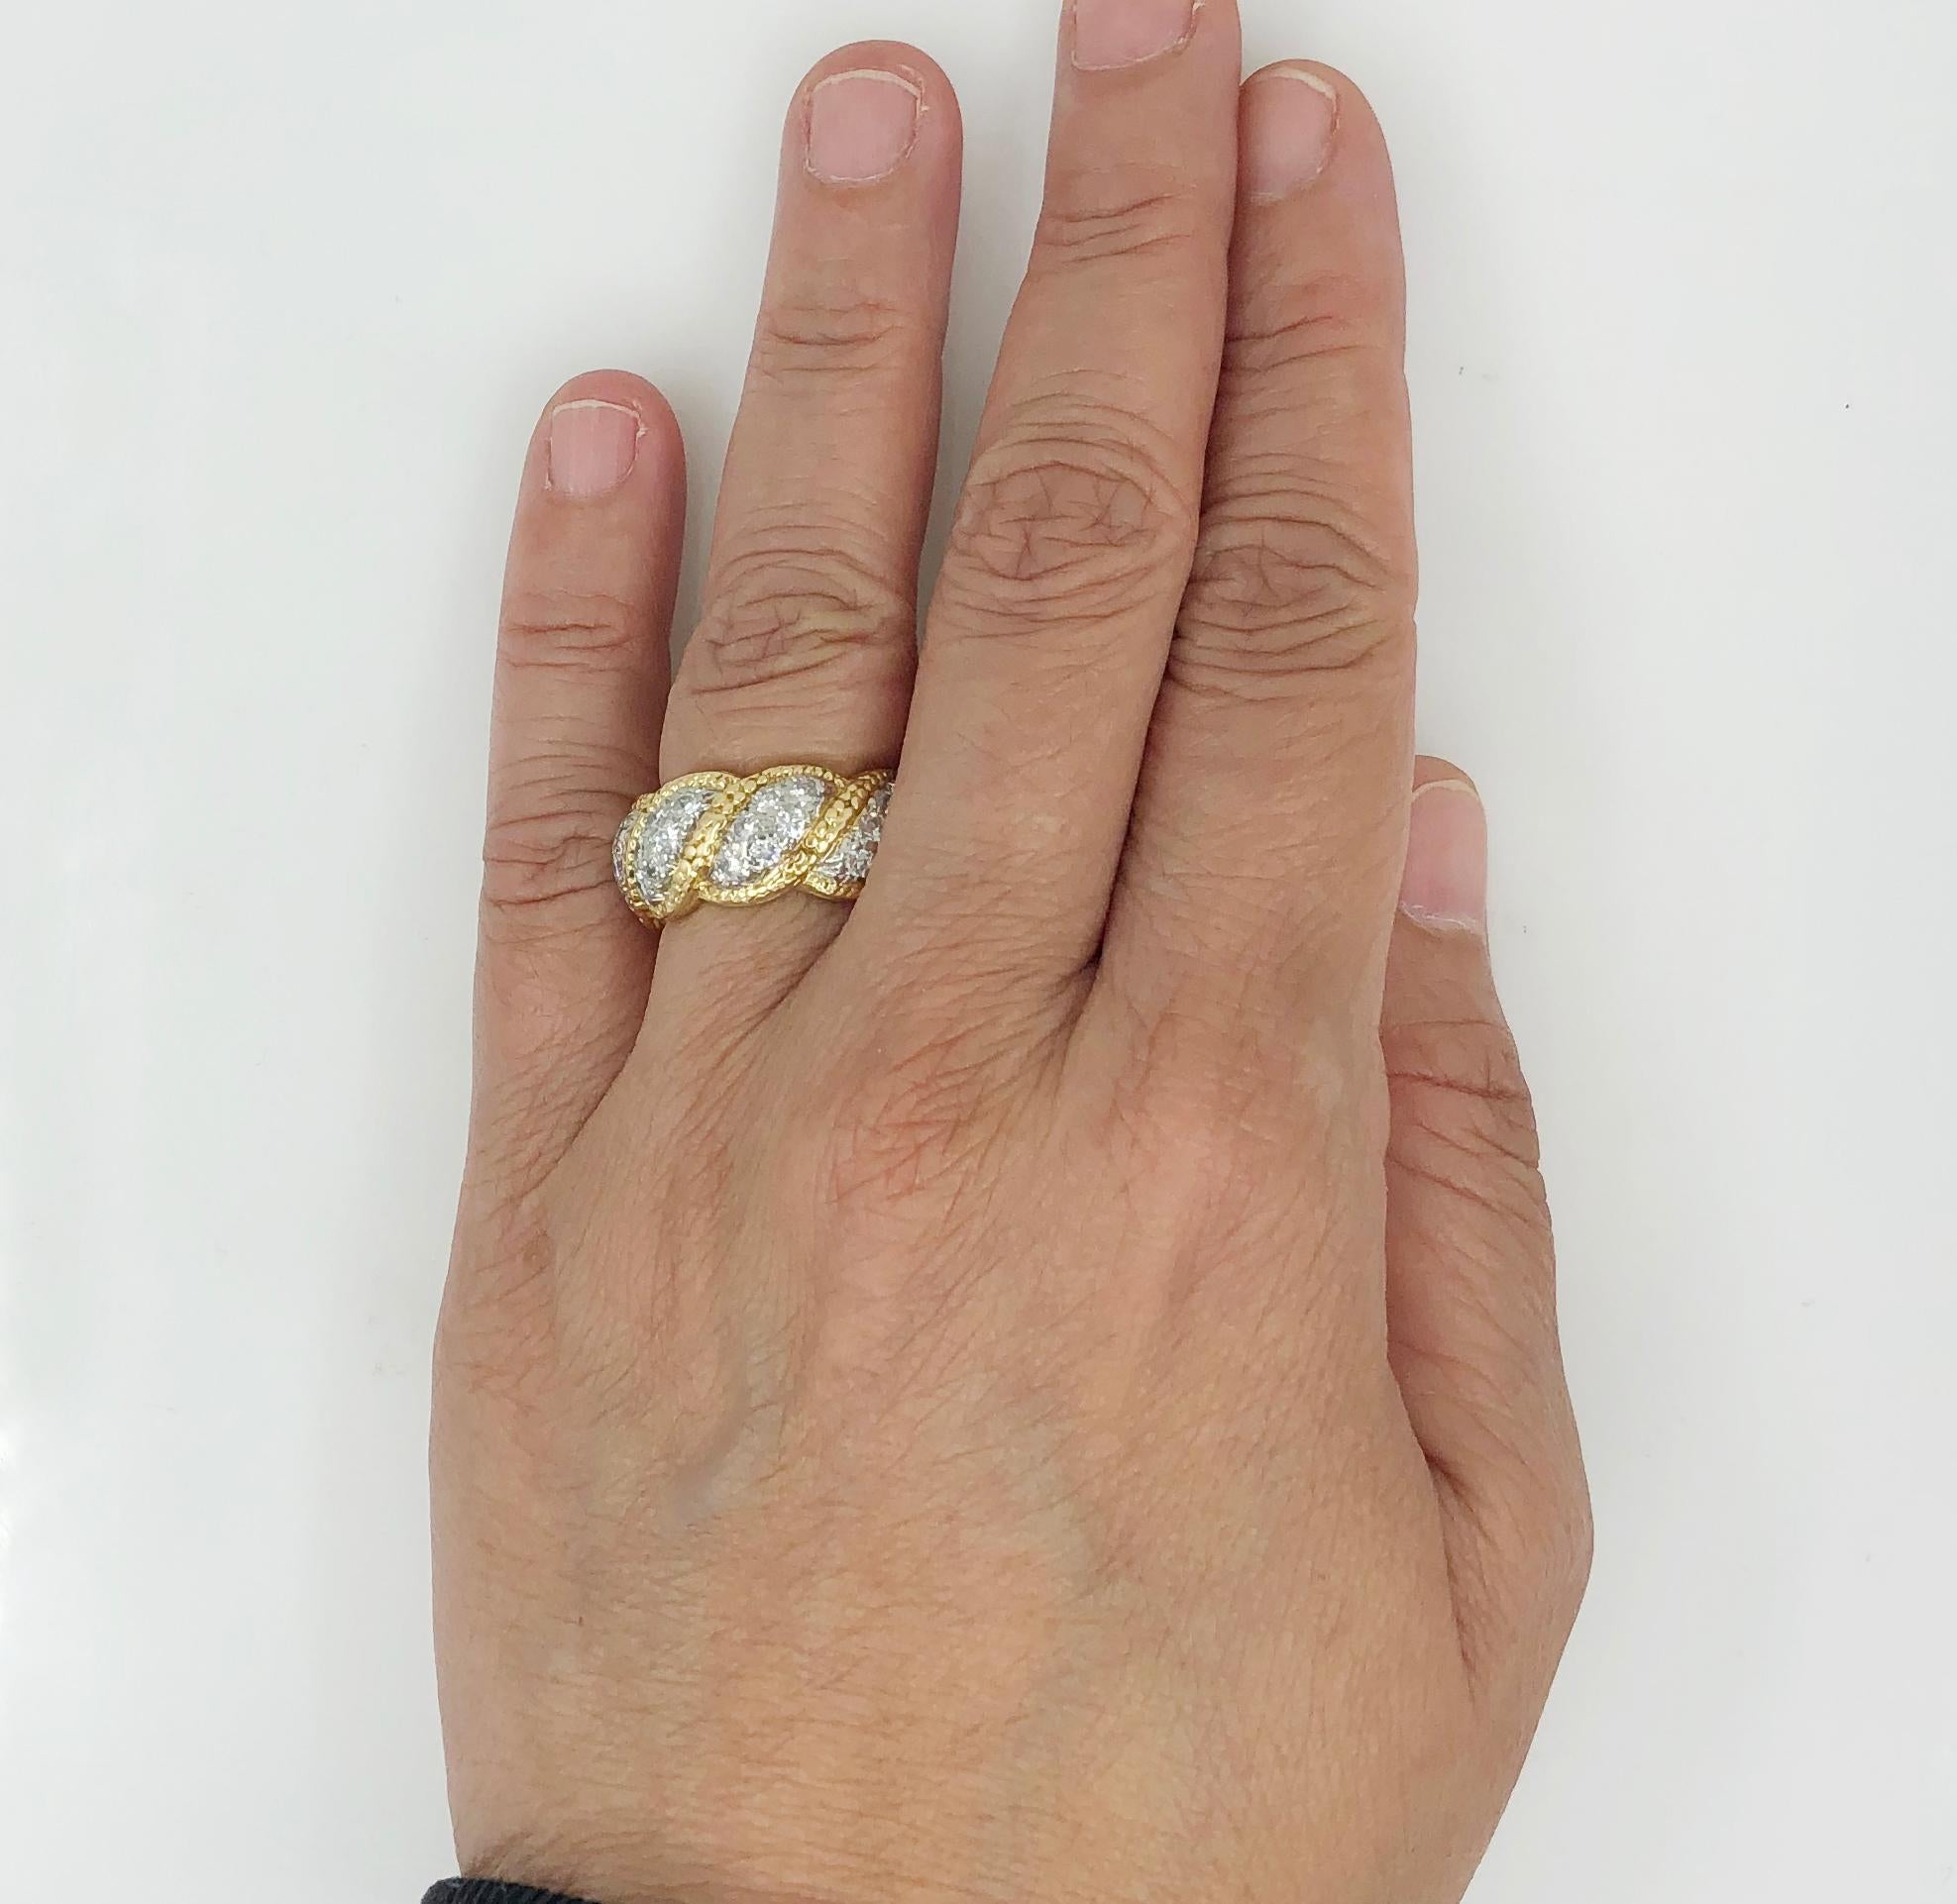 TIFFANY & Co. Schlumberger Studio Diamond Ring.
Crafted in 18k yellow gold and platinum wedding ring, set with round brilliant-cut diamonds, Tiffany & Co
ring size 6.25 and 0.25″ wide
Signed “Tiffany & Co. Schlumberger Studios”